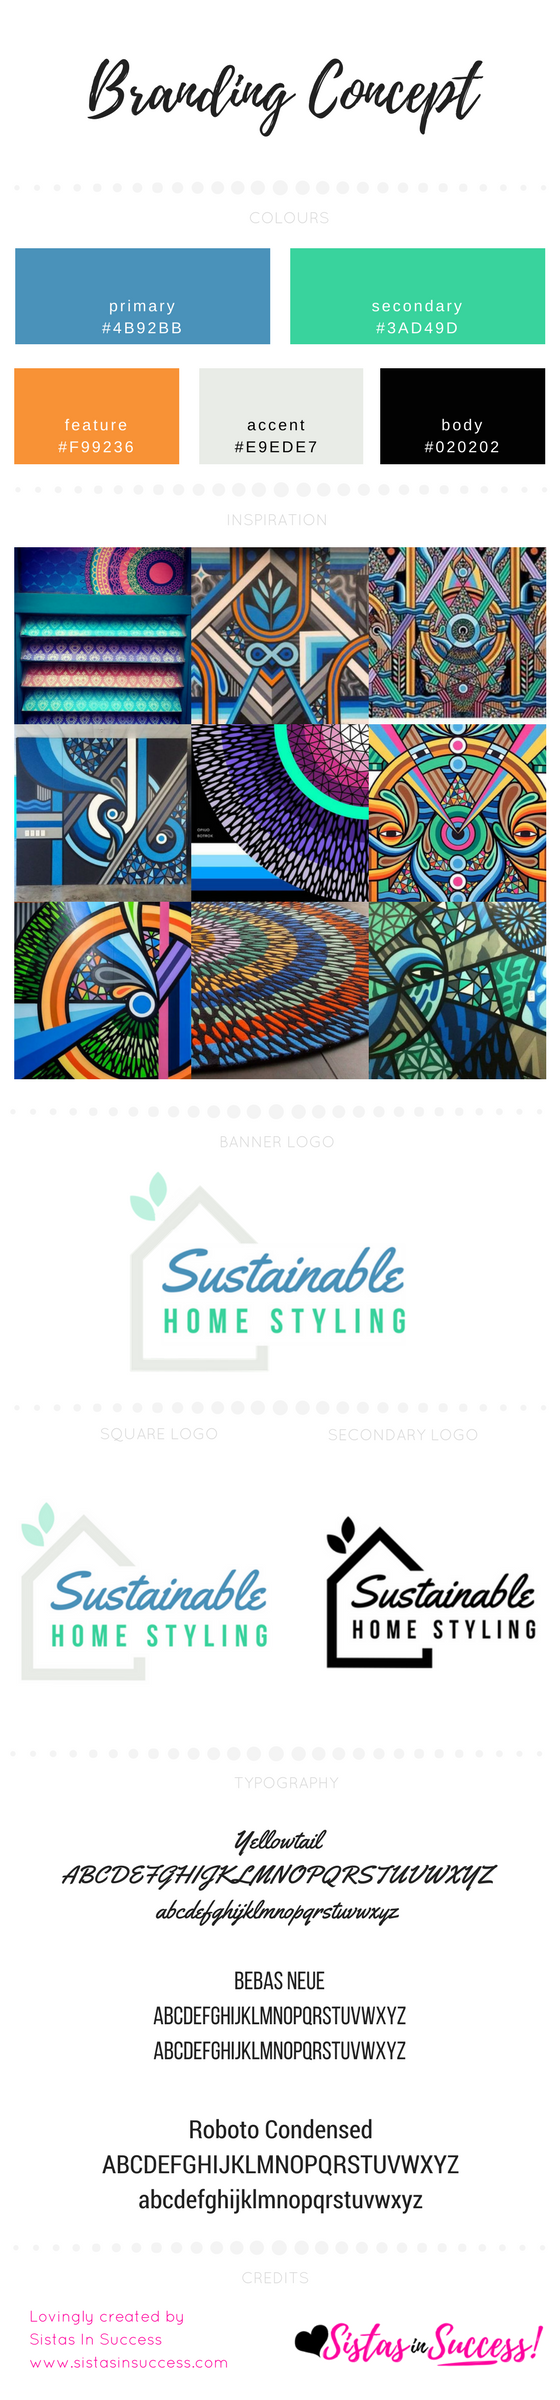 Sustainable Home Styling Branding Concept V1